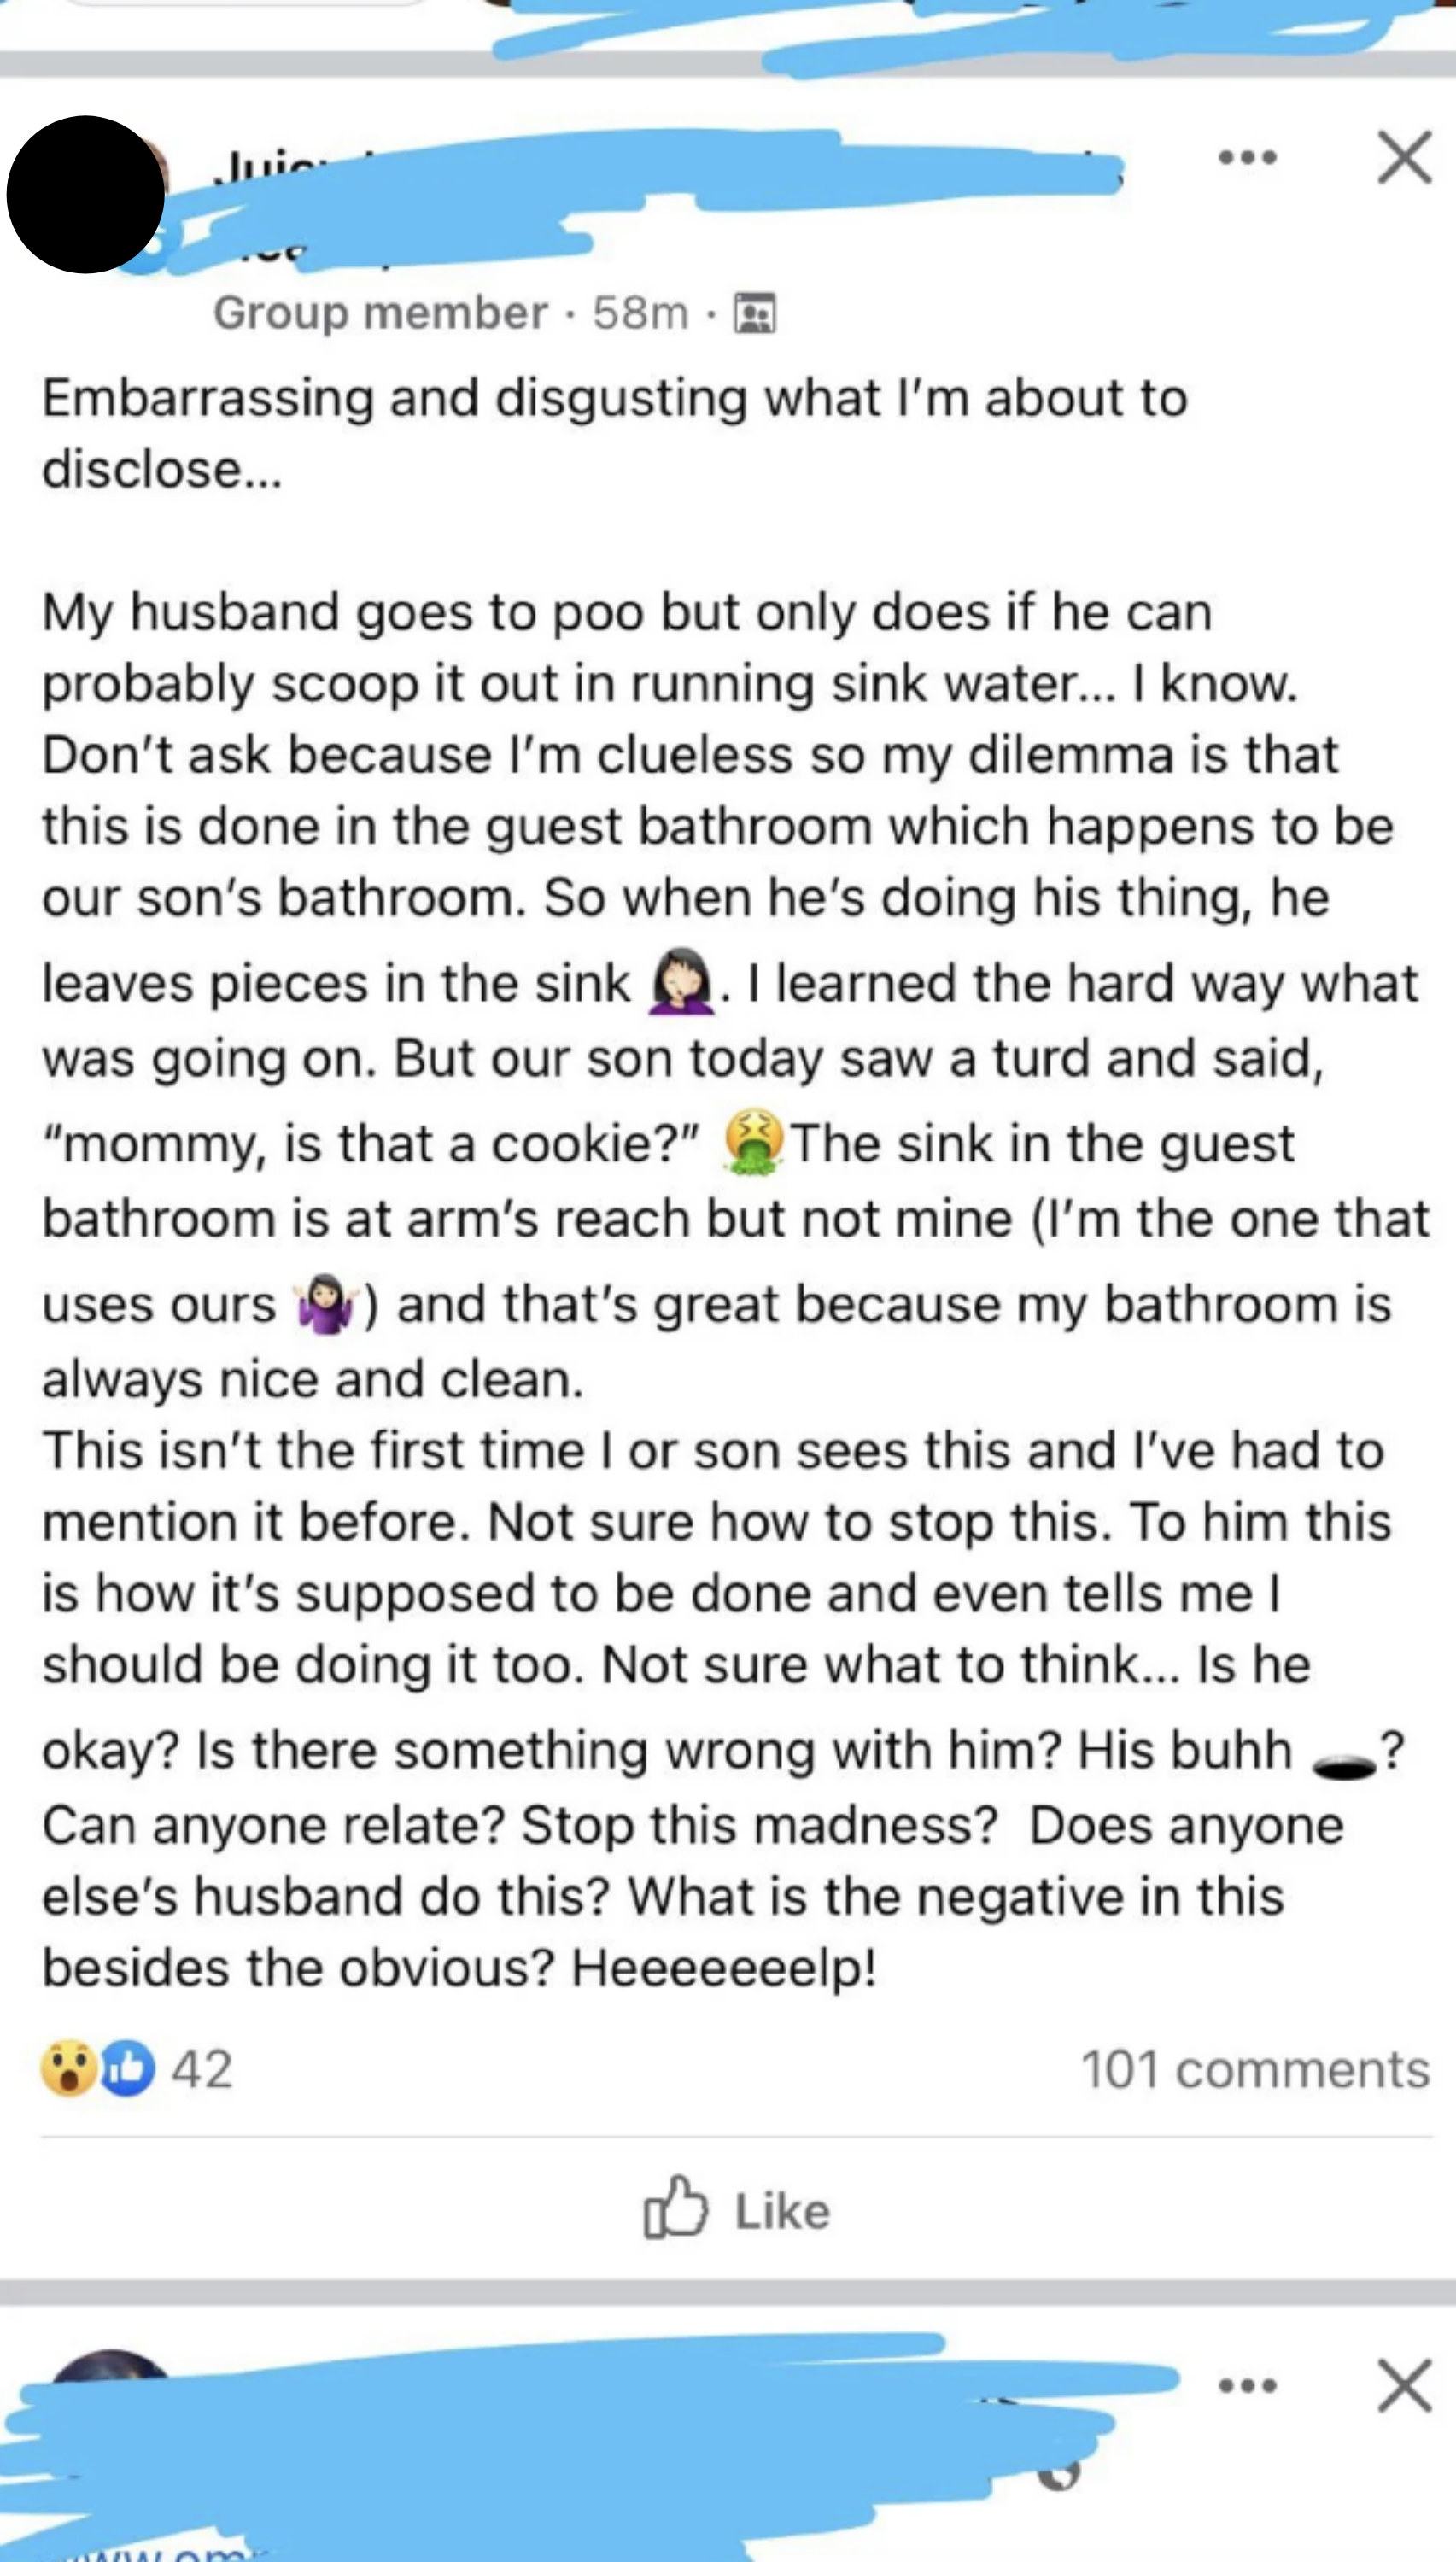 &quot;Can anyone relate? Stop this madness? Does anyone else&#x27;s husband do this?&quot;